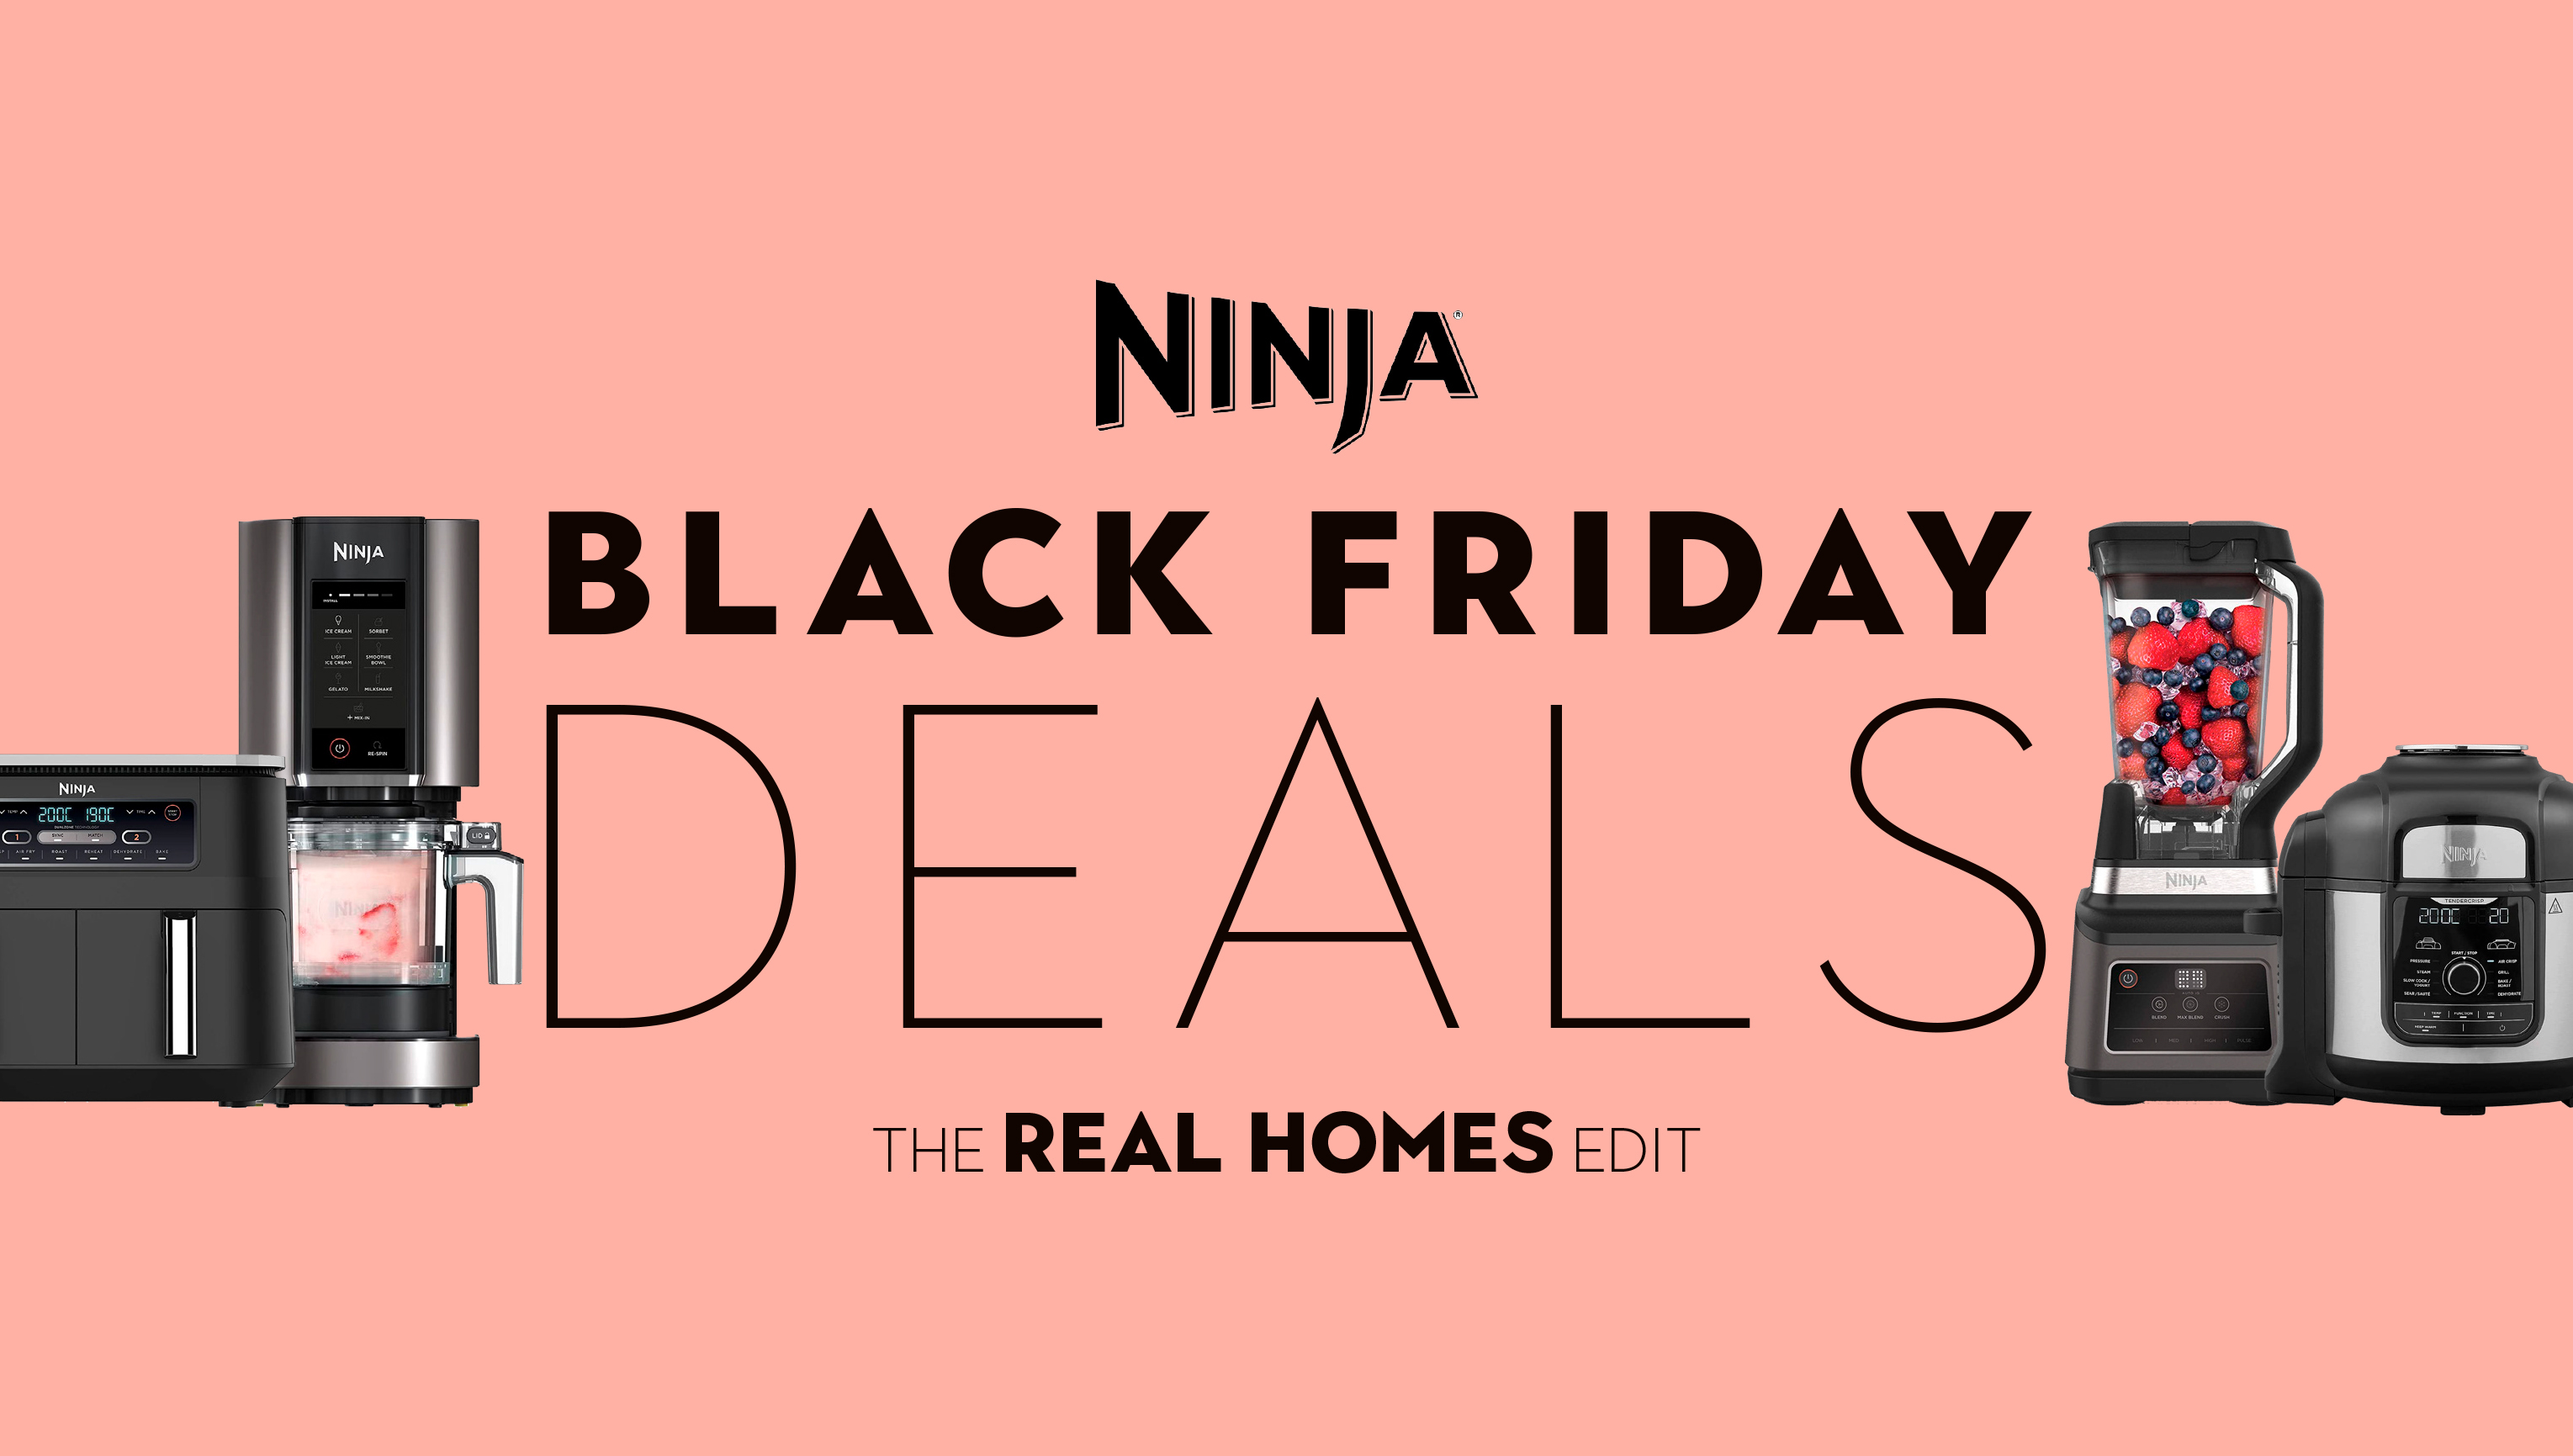 Kohl's Black Friday in July 2019 - Ad & Deals